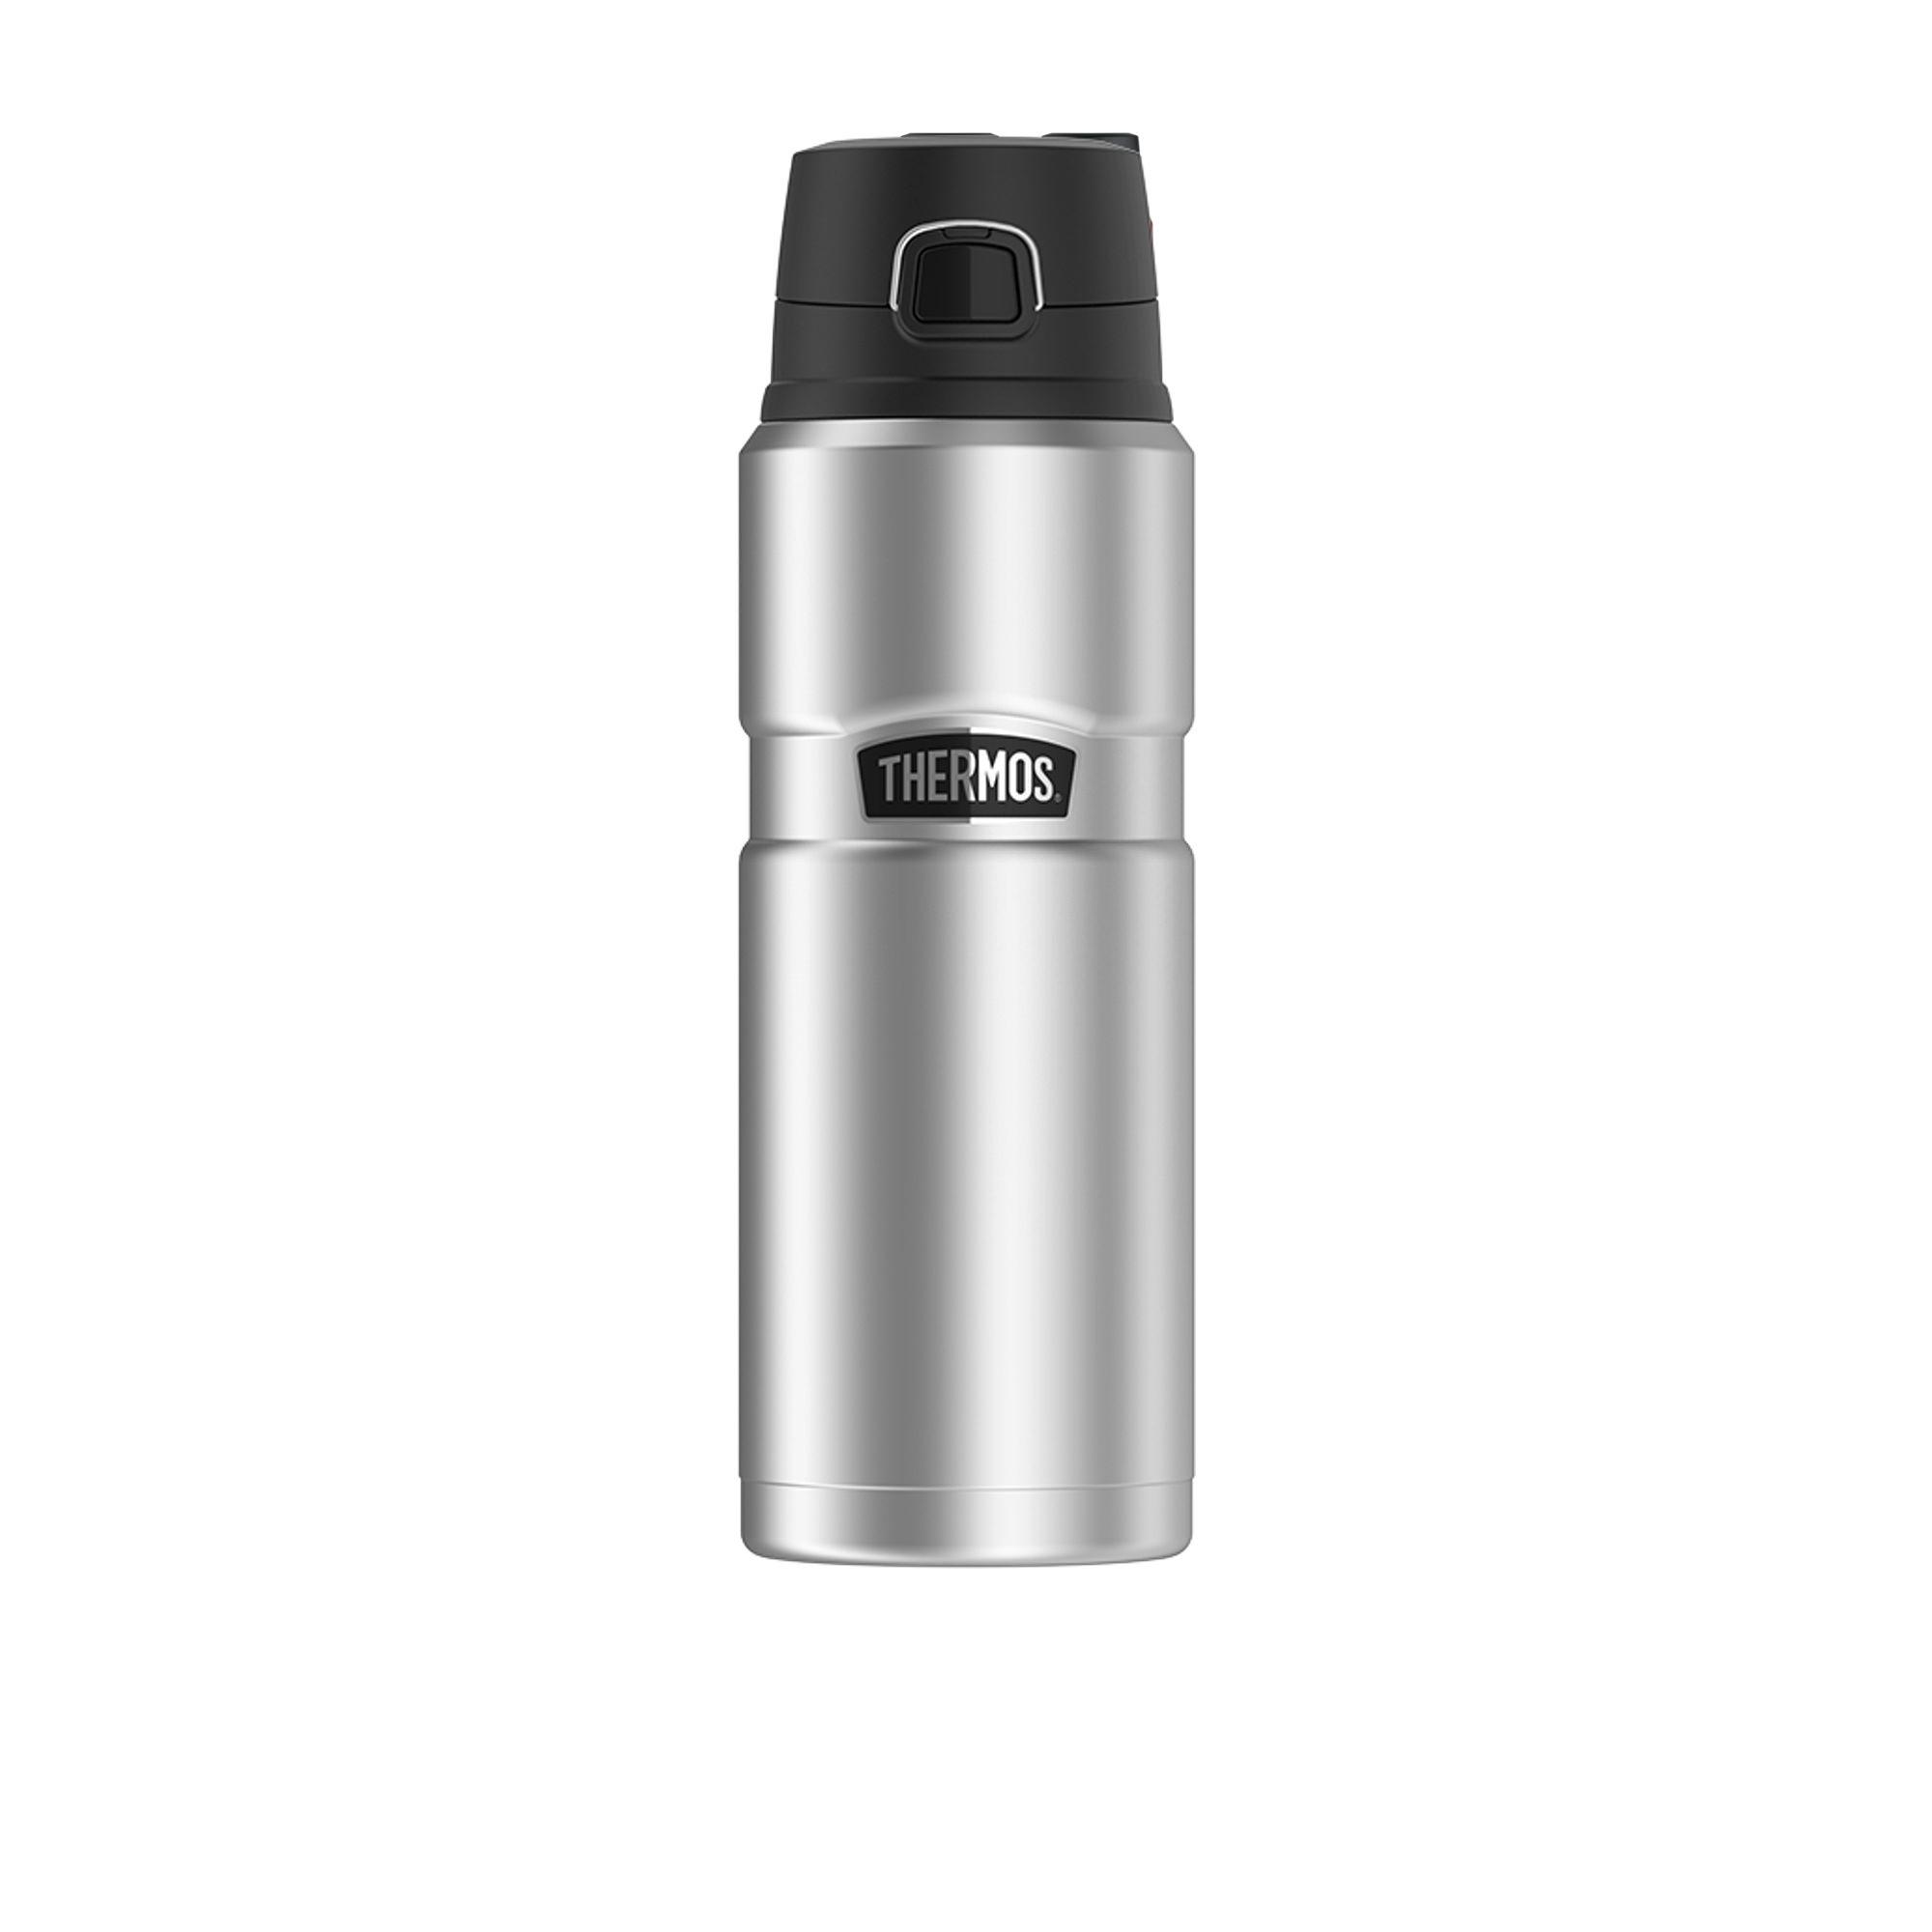 Thermos Stainless King Insulated Drink Bottle 710ml Stainless Steel Image 1